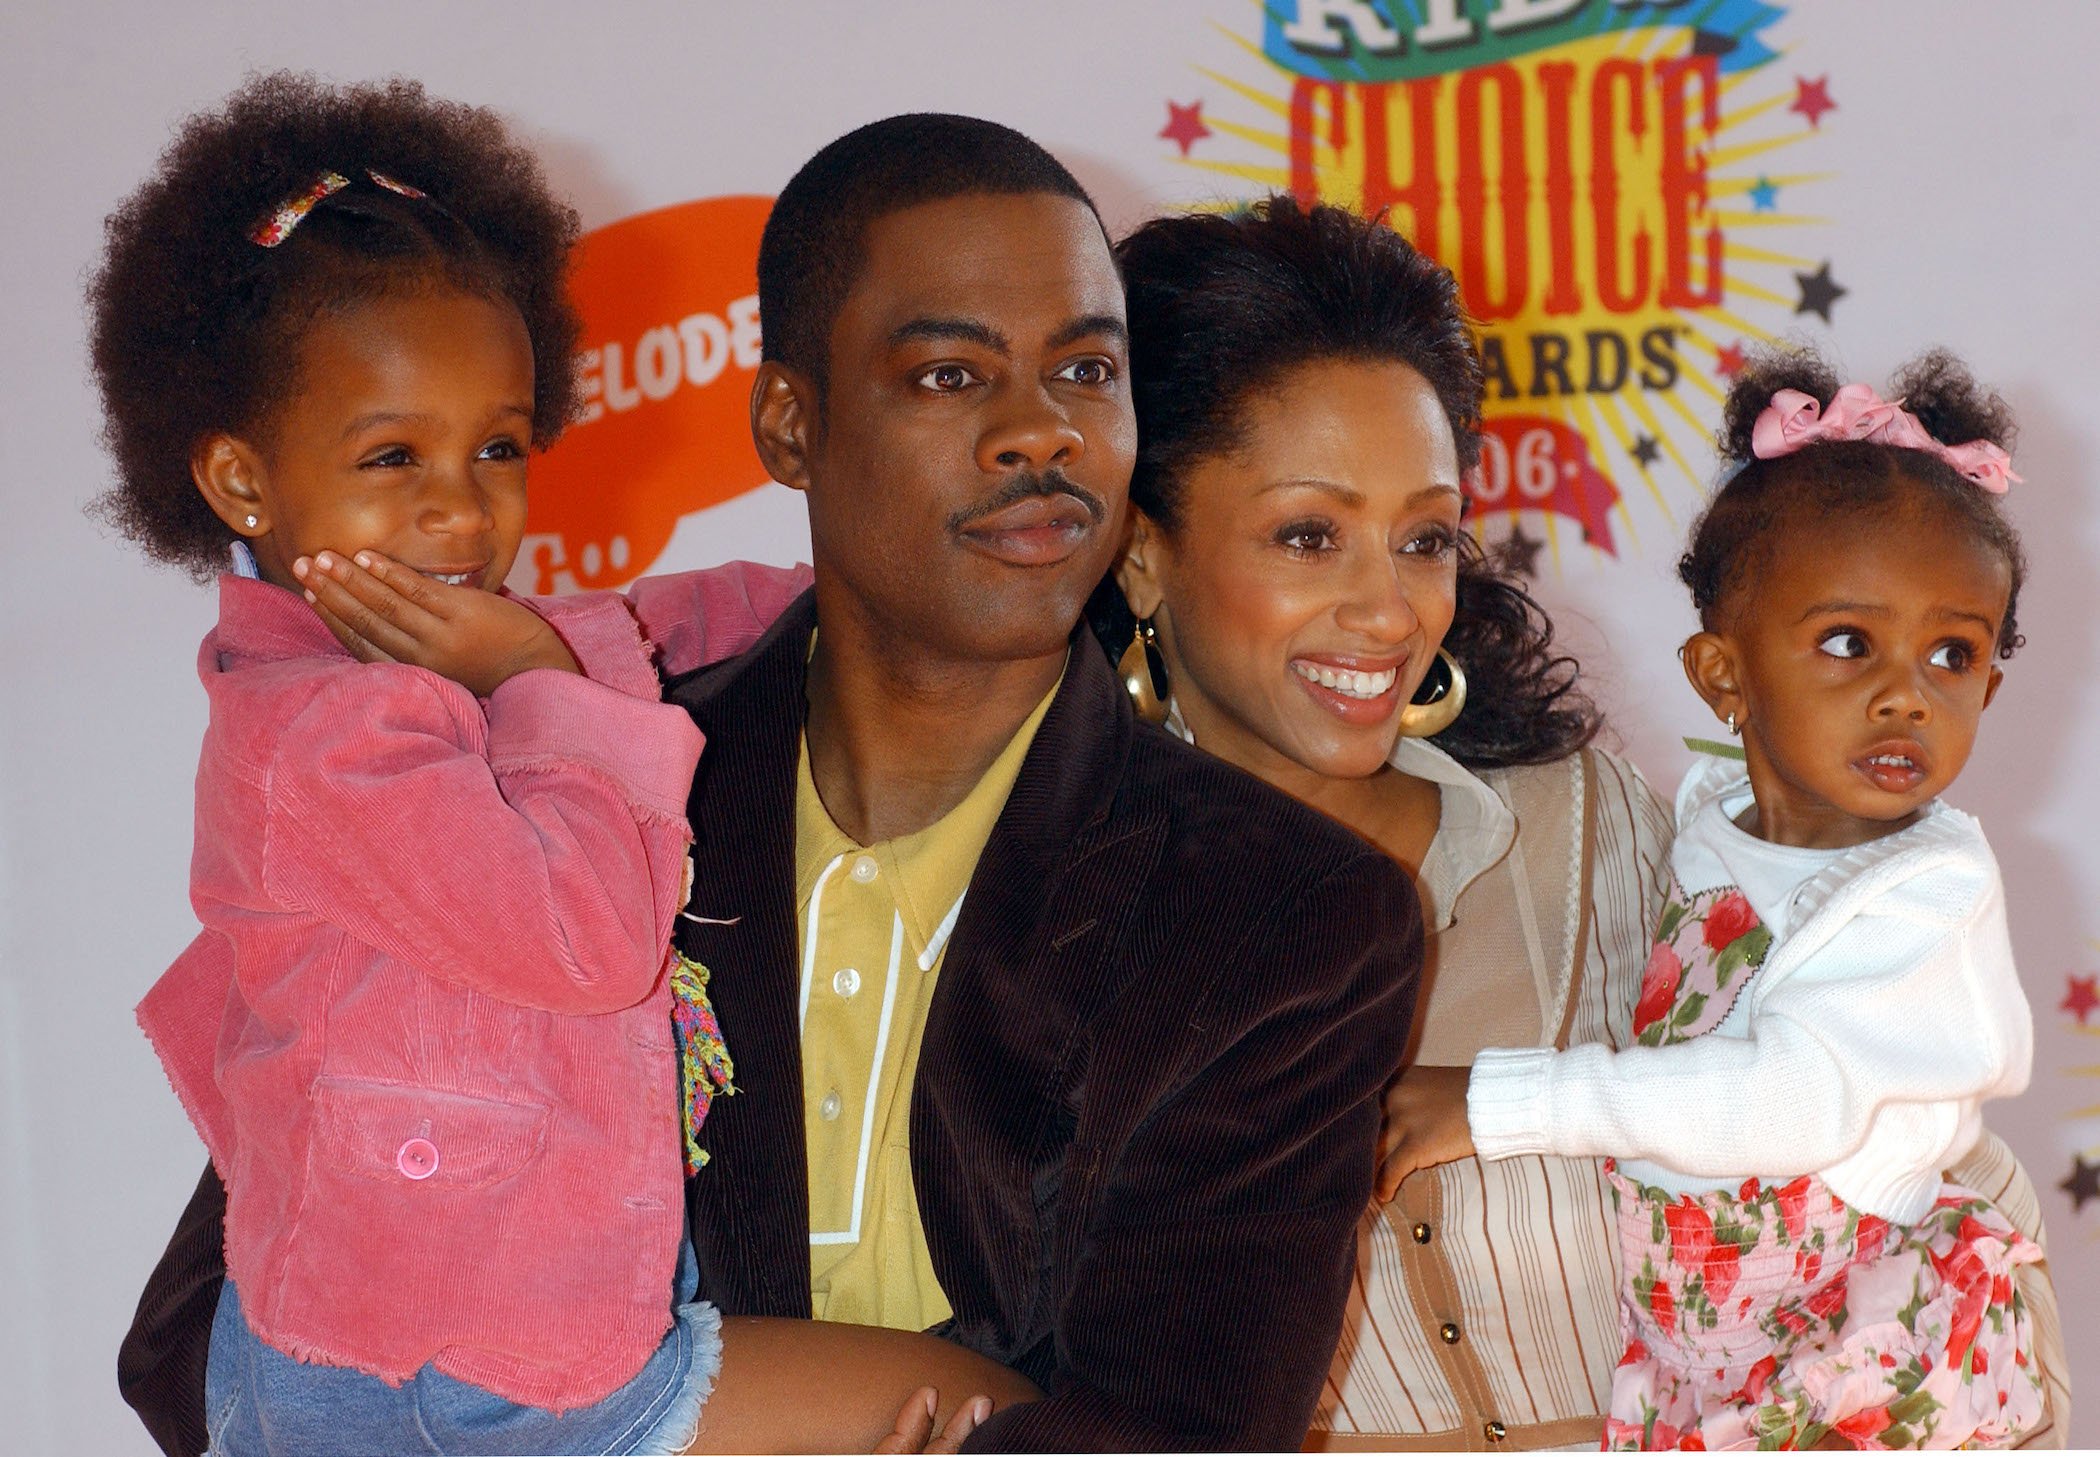 Chris Rock and his wife, Malaak Compton-Rock with their two children at an awards show